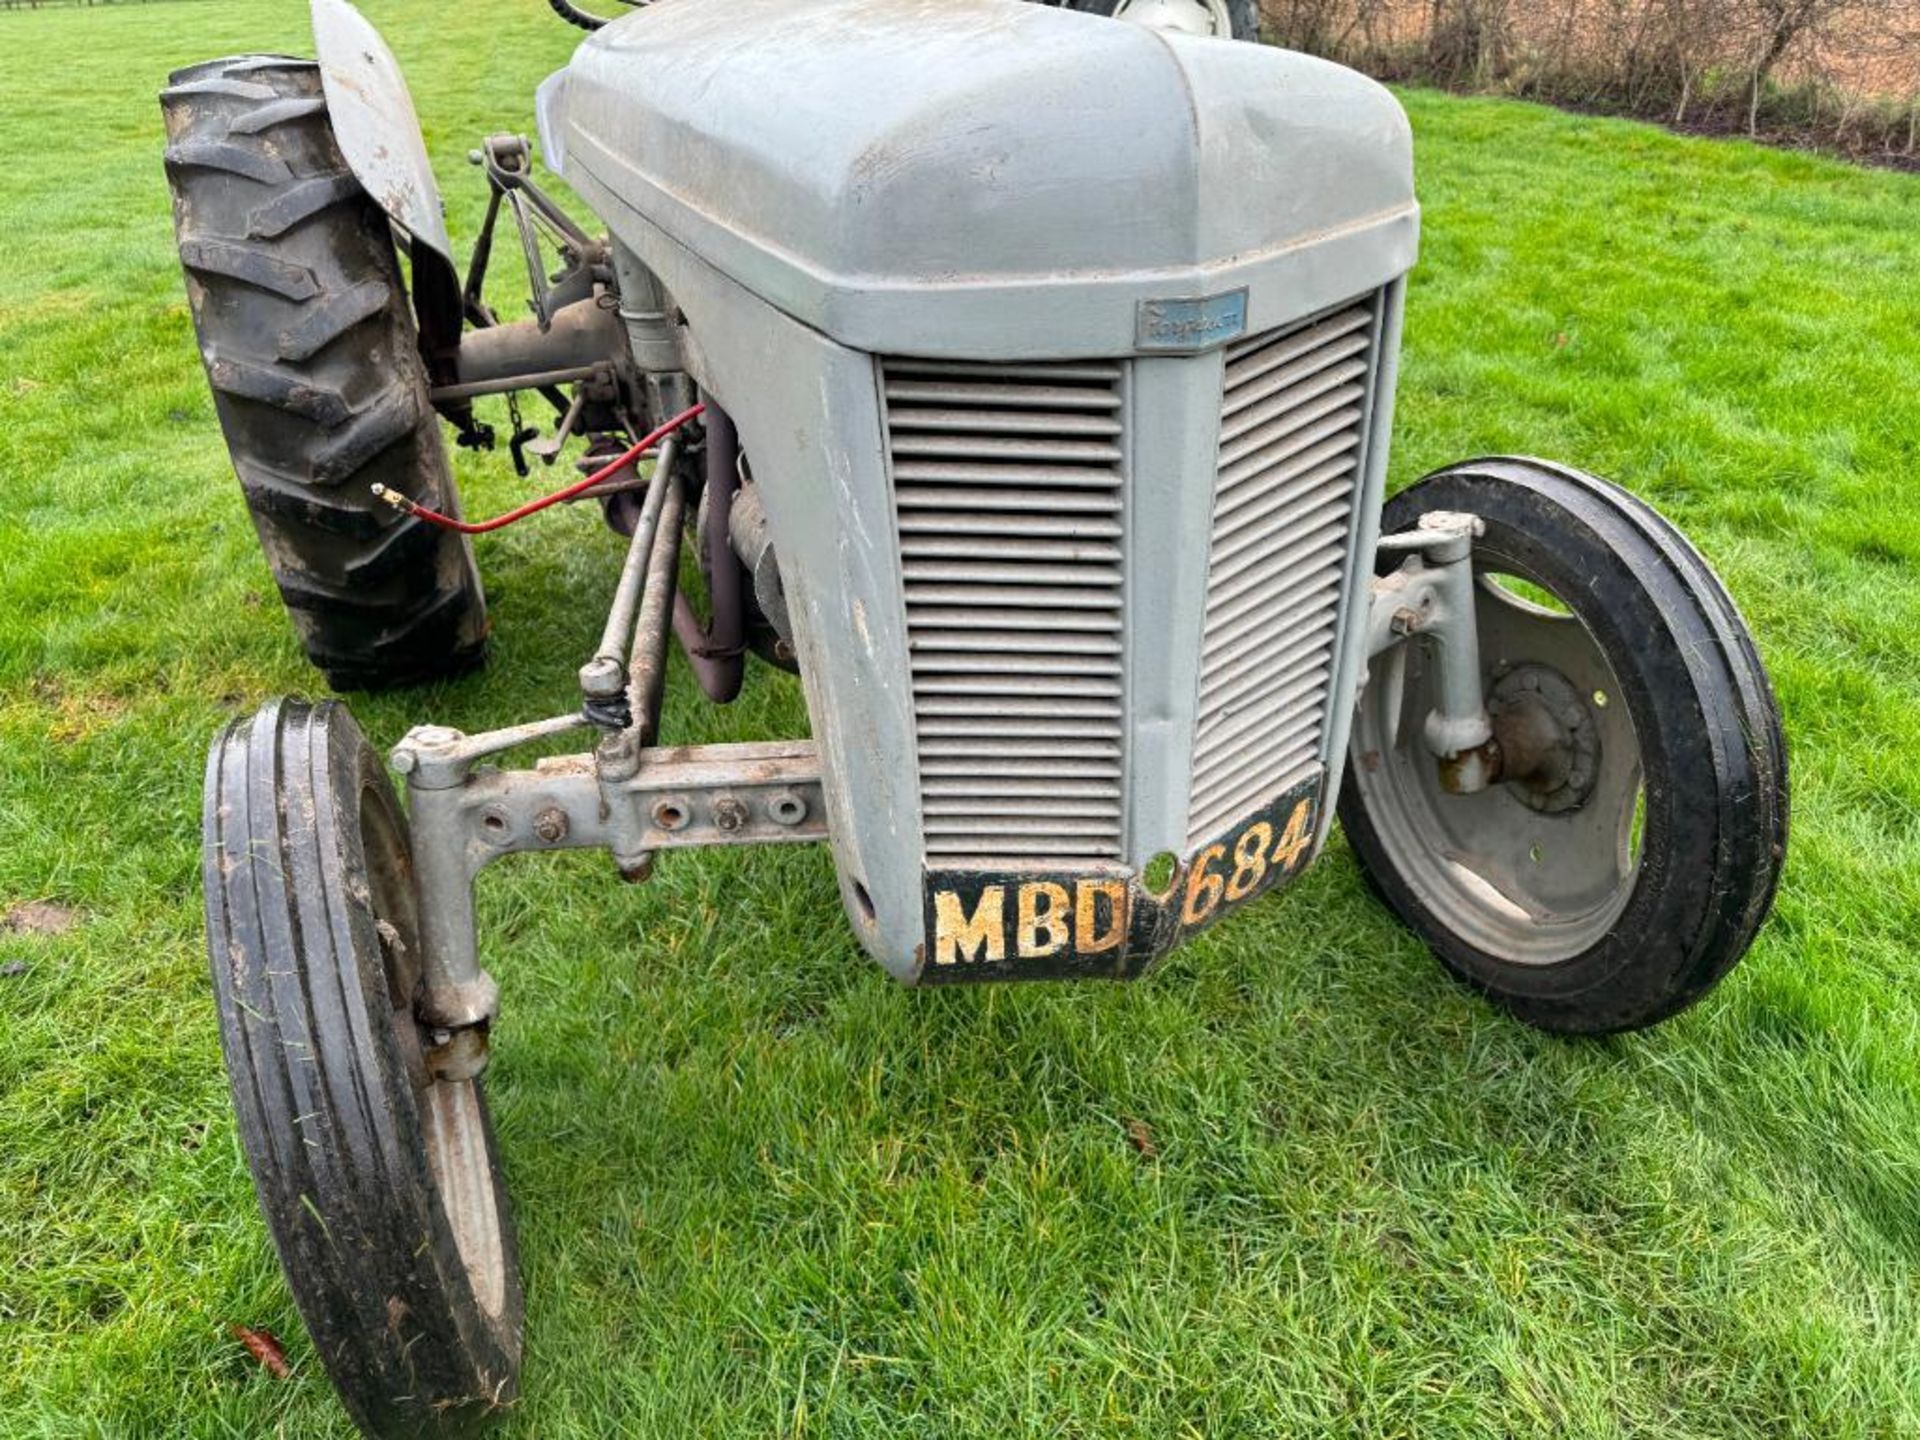 1955 Ferguson TED 2wd petrol paraffin tractor with underslung exhaust and linkage on 12.4-28 rear an - Image 11 of 11